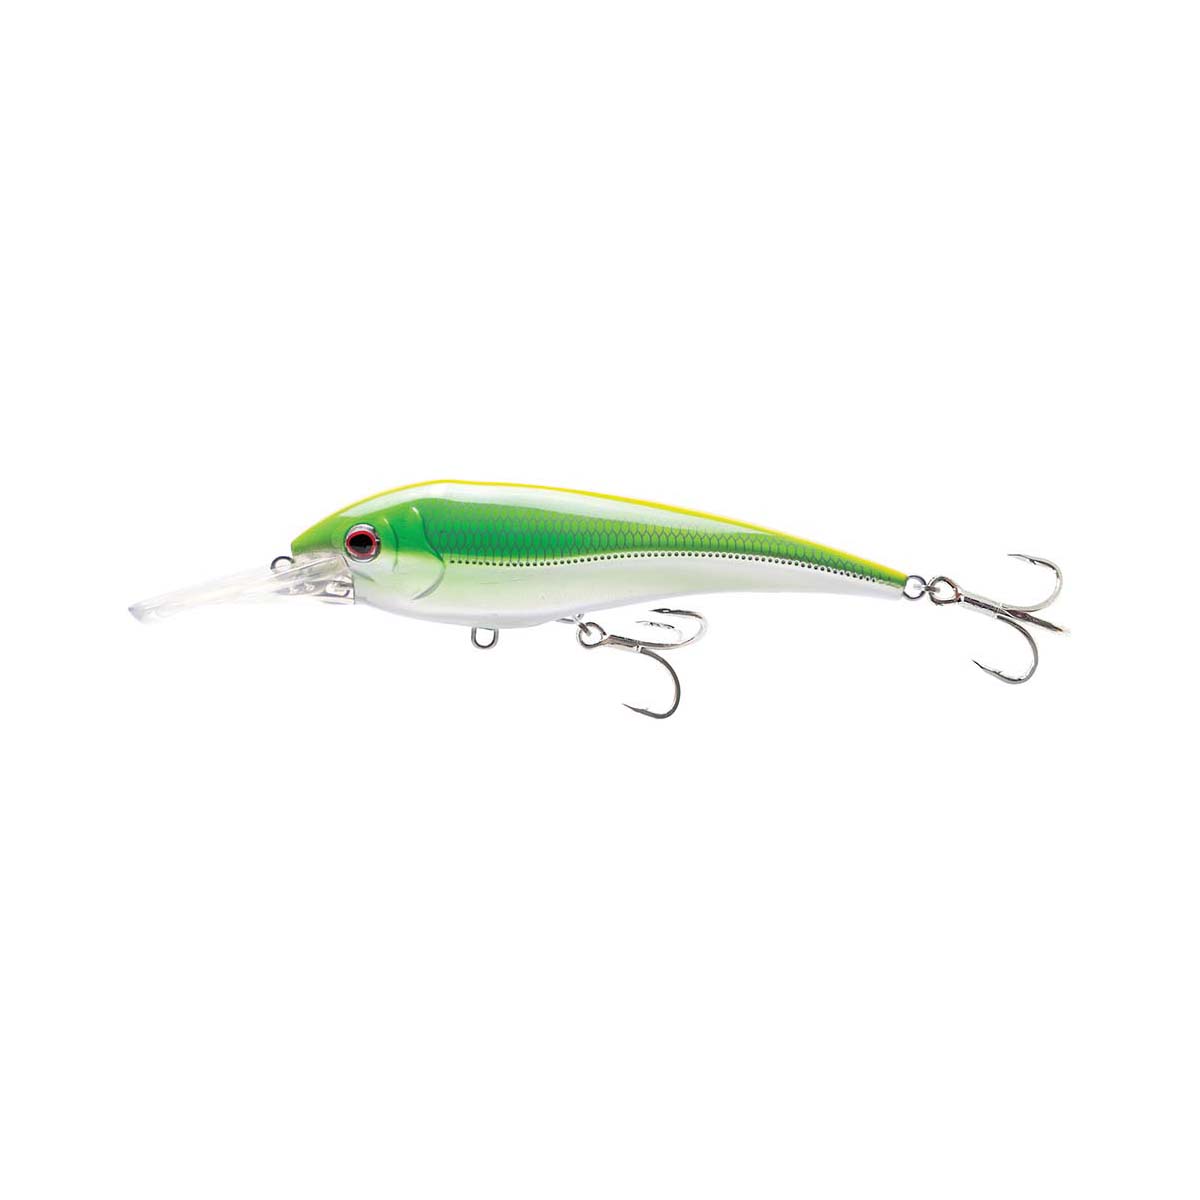 Nomad DTX Minnow Hard Body Lure 145mm Chartreuse Chrome @ Club BCF